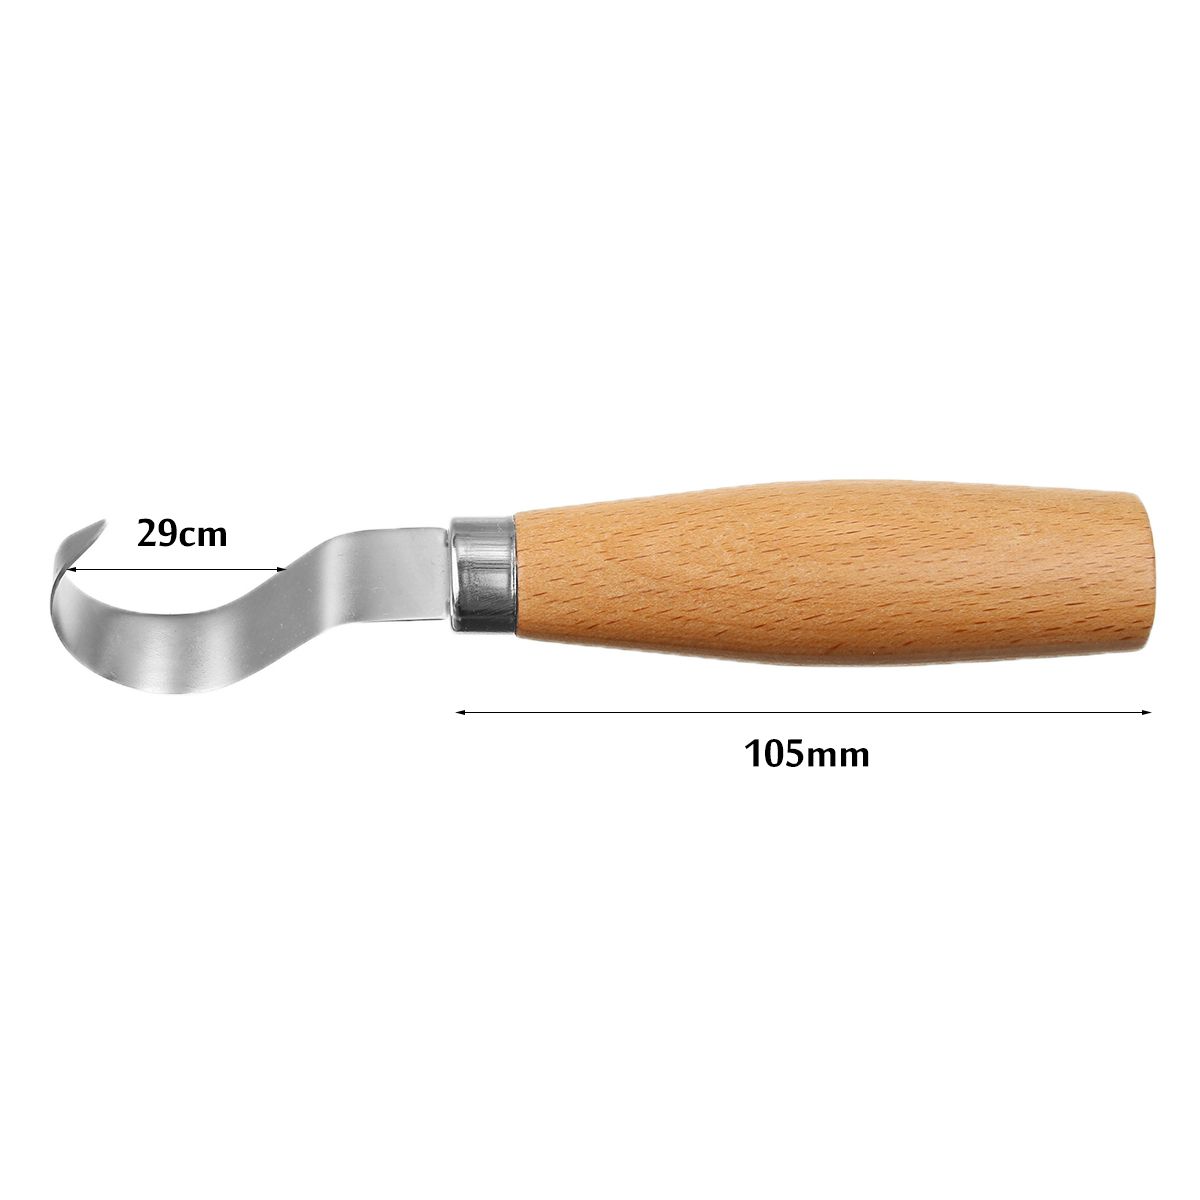 Wood-Carving-Hook-Spoon-Chisel-Woodworking-Cutter-Craft-Sharp-Edge-Tool-1565890